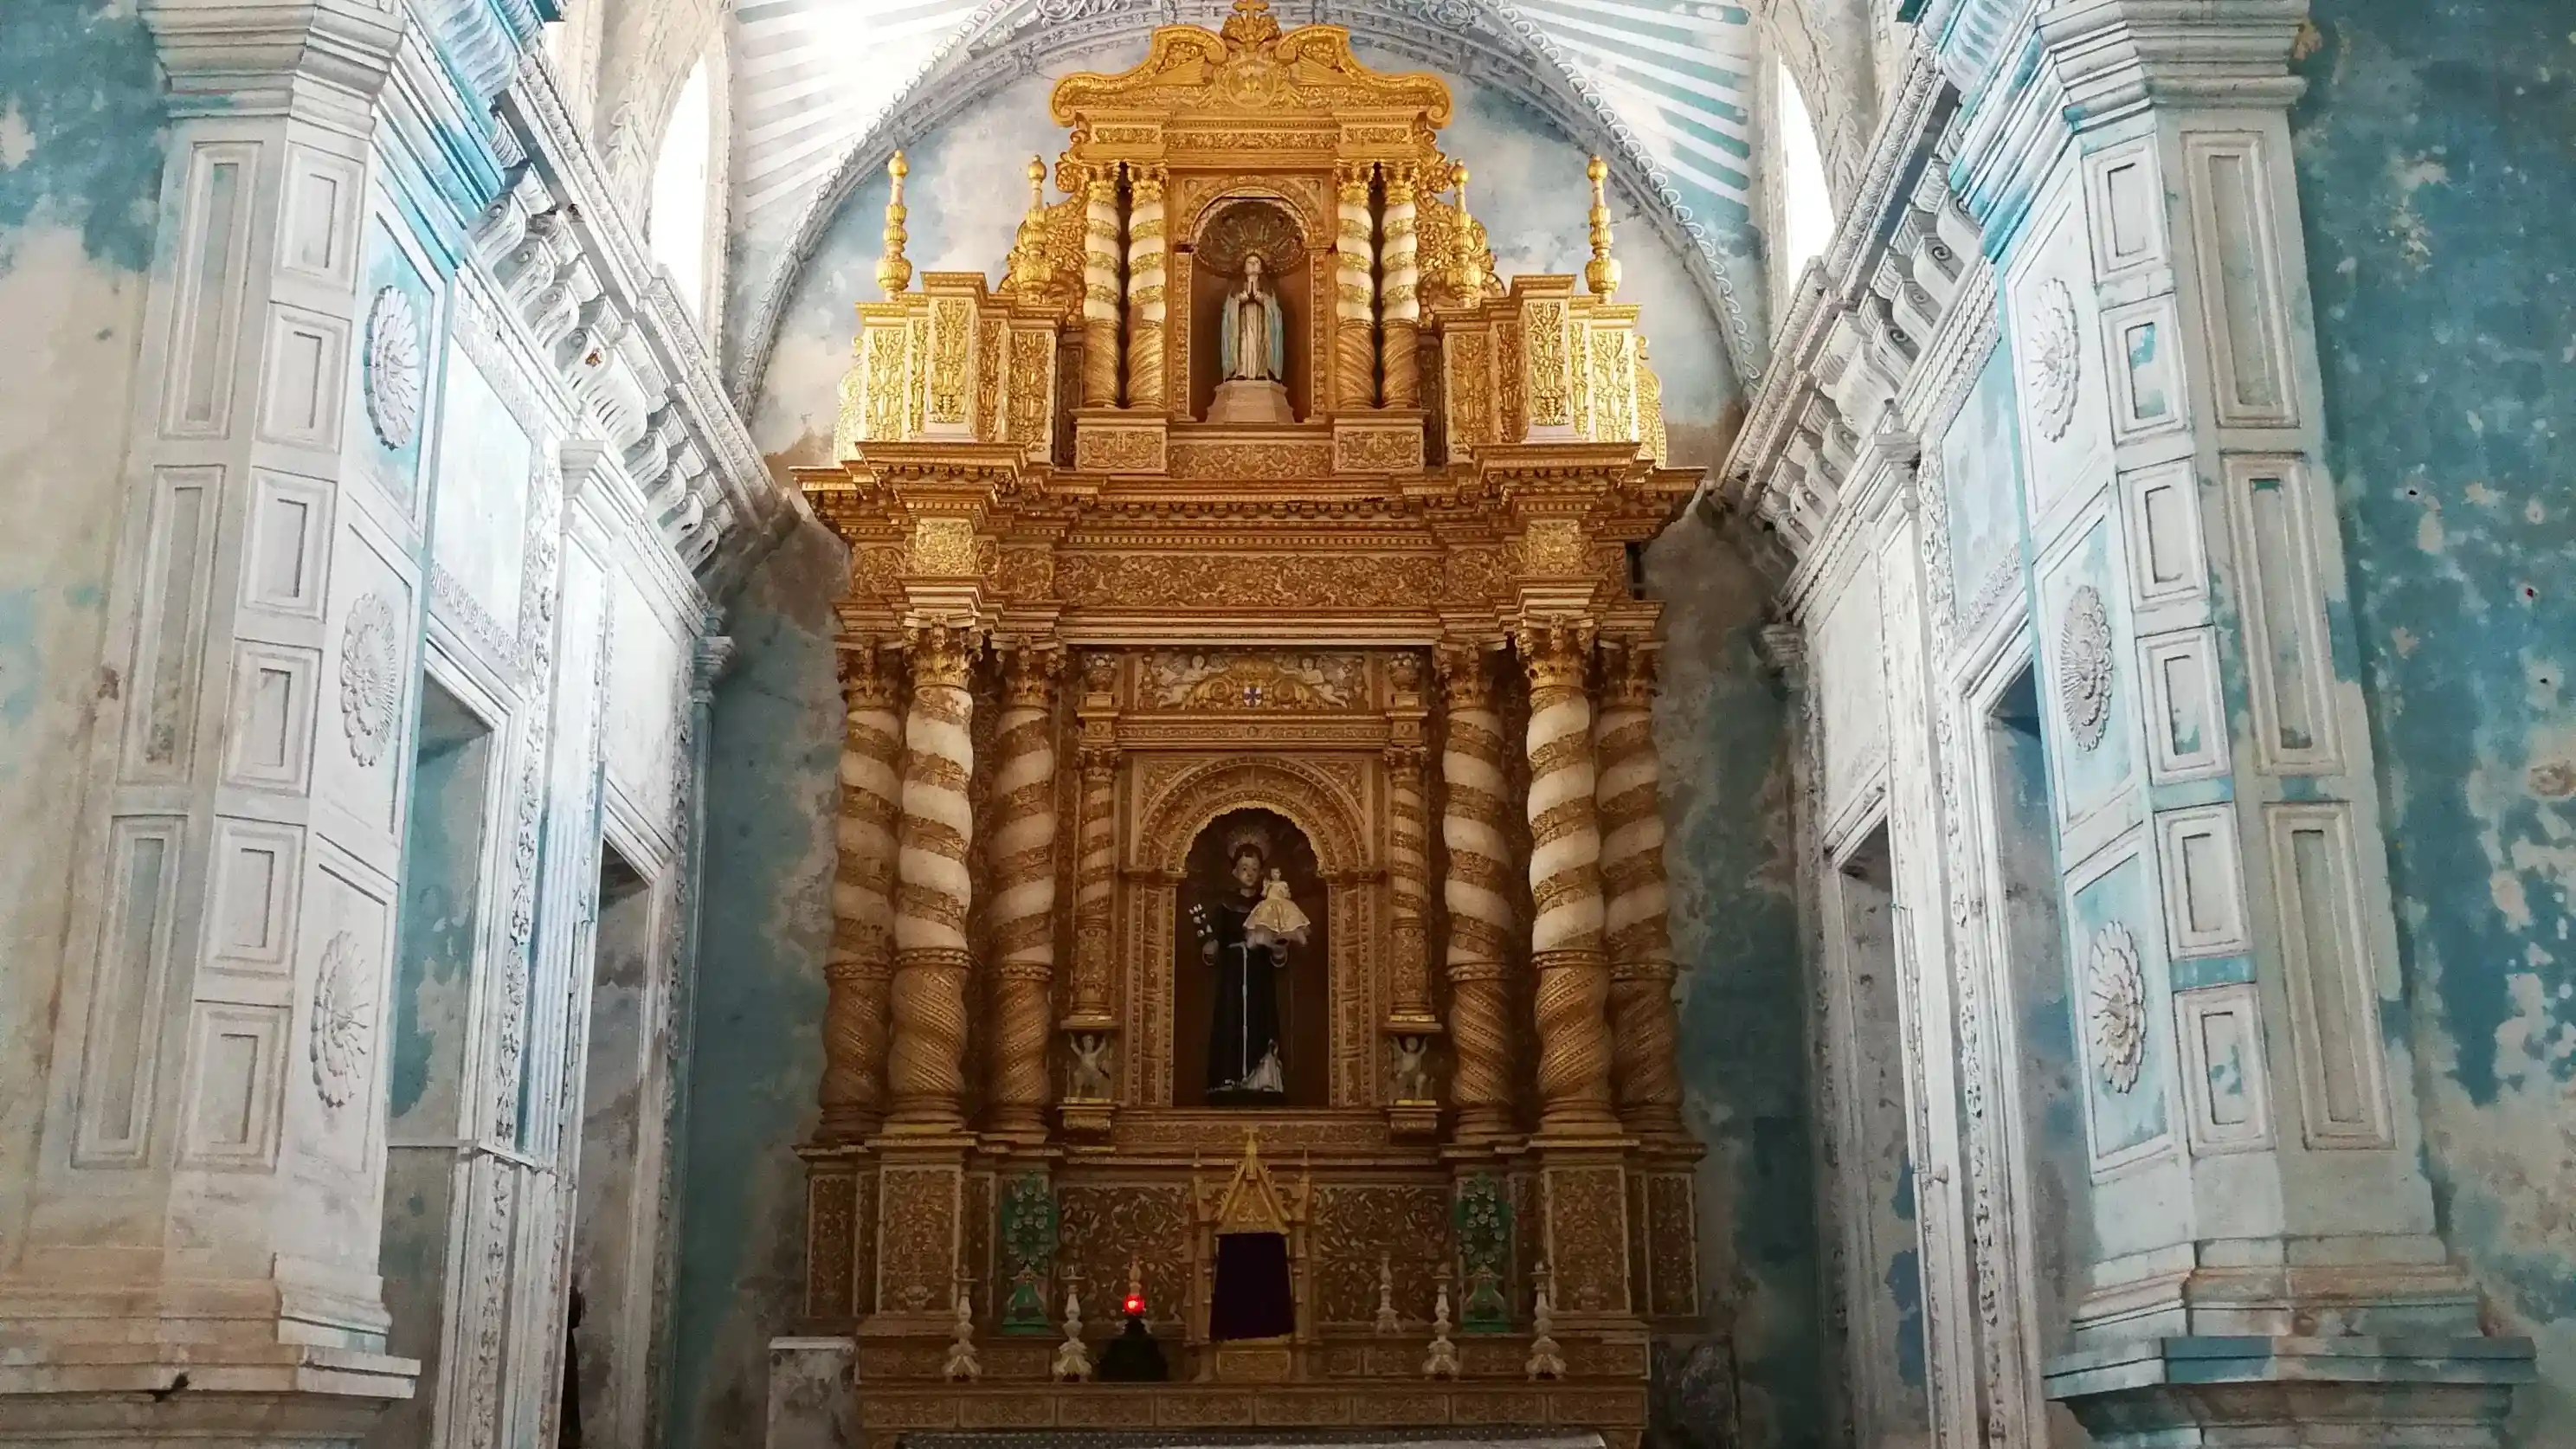 Royal Chapel of St. Anthony: A Regal Oasis of Spiritual Tranquility